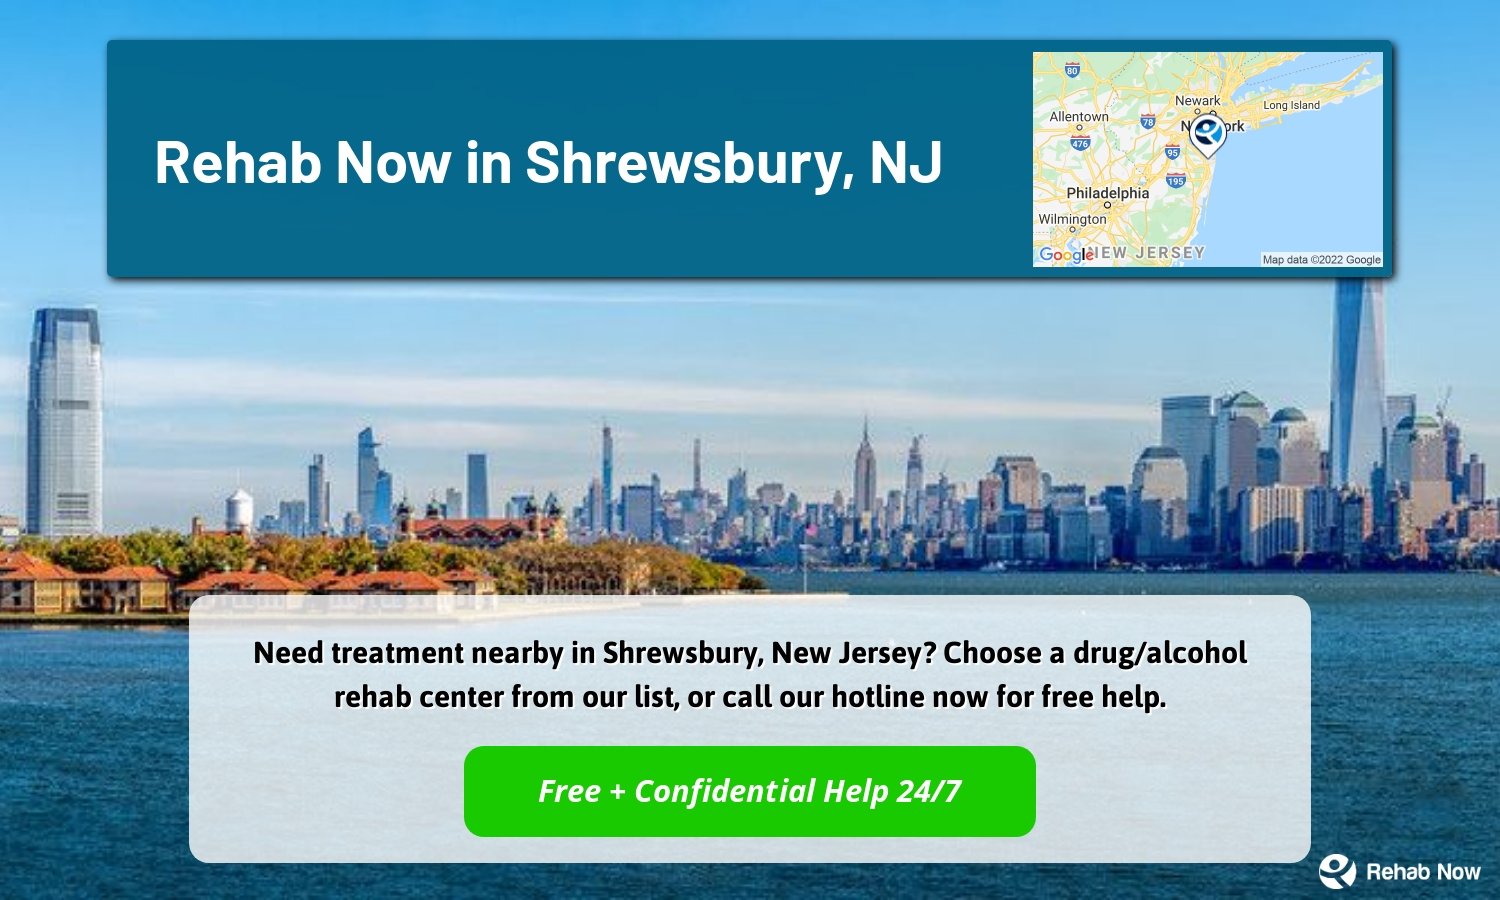 Need treatment nearby in Shrewsbury, New Jersey? Choose a drug/alcohol rehab center from our list, or call our hotline now for free help.